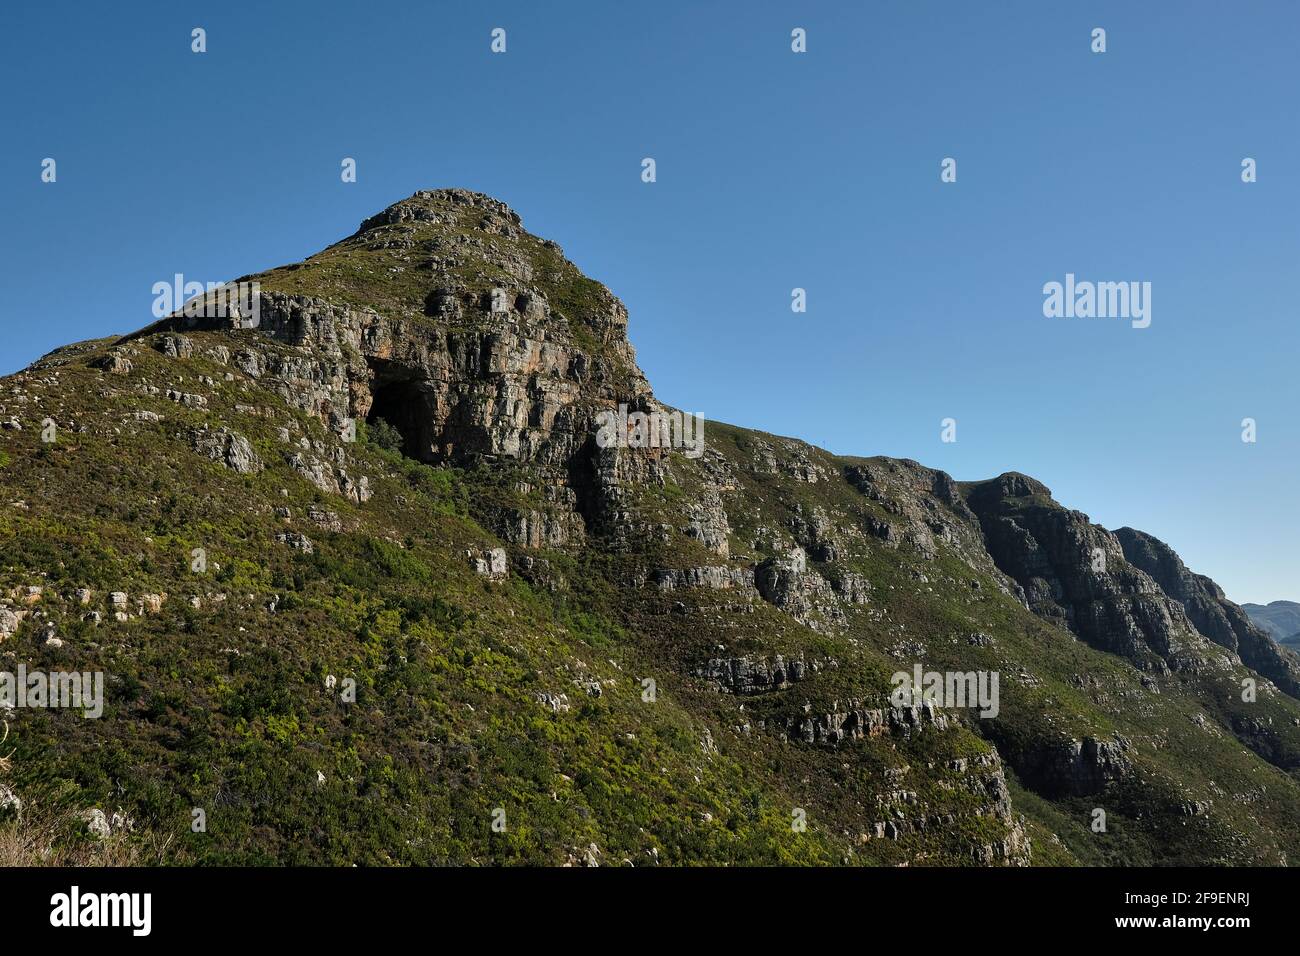 Elephants Eye hiking trail in the SANParks silvermine nature reserve, Cape Town, South Africa Stock Photo